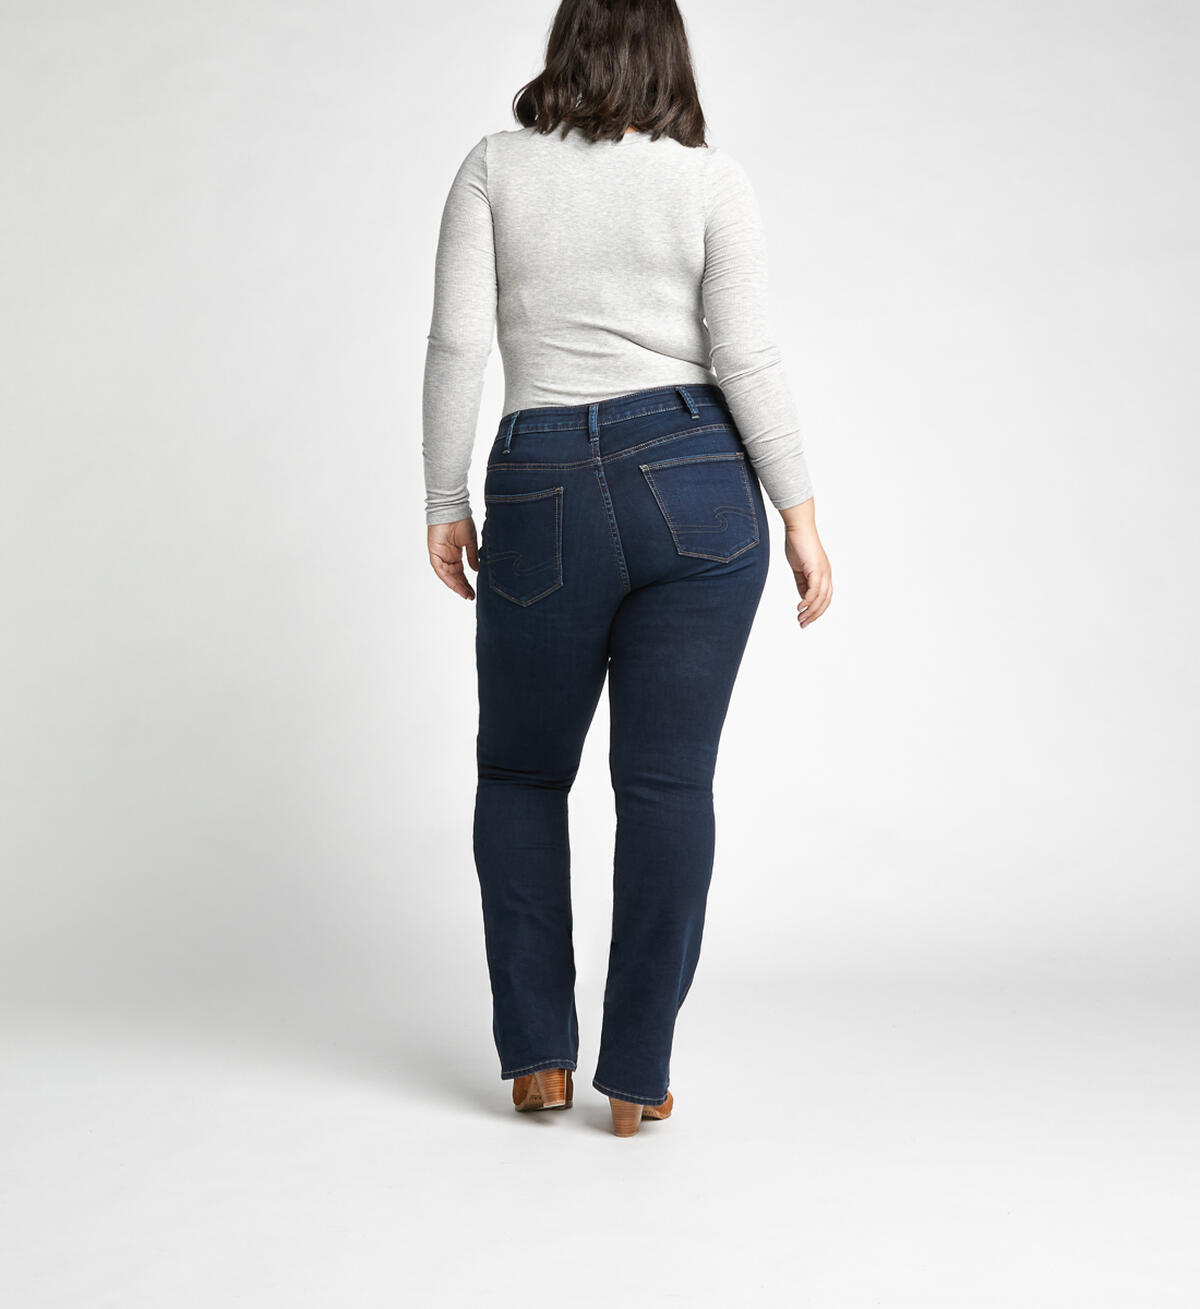 Avery High Rise Slim Bootcut Jeans Plus Size, Indigo, hi-res image number 1